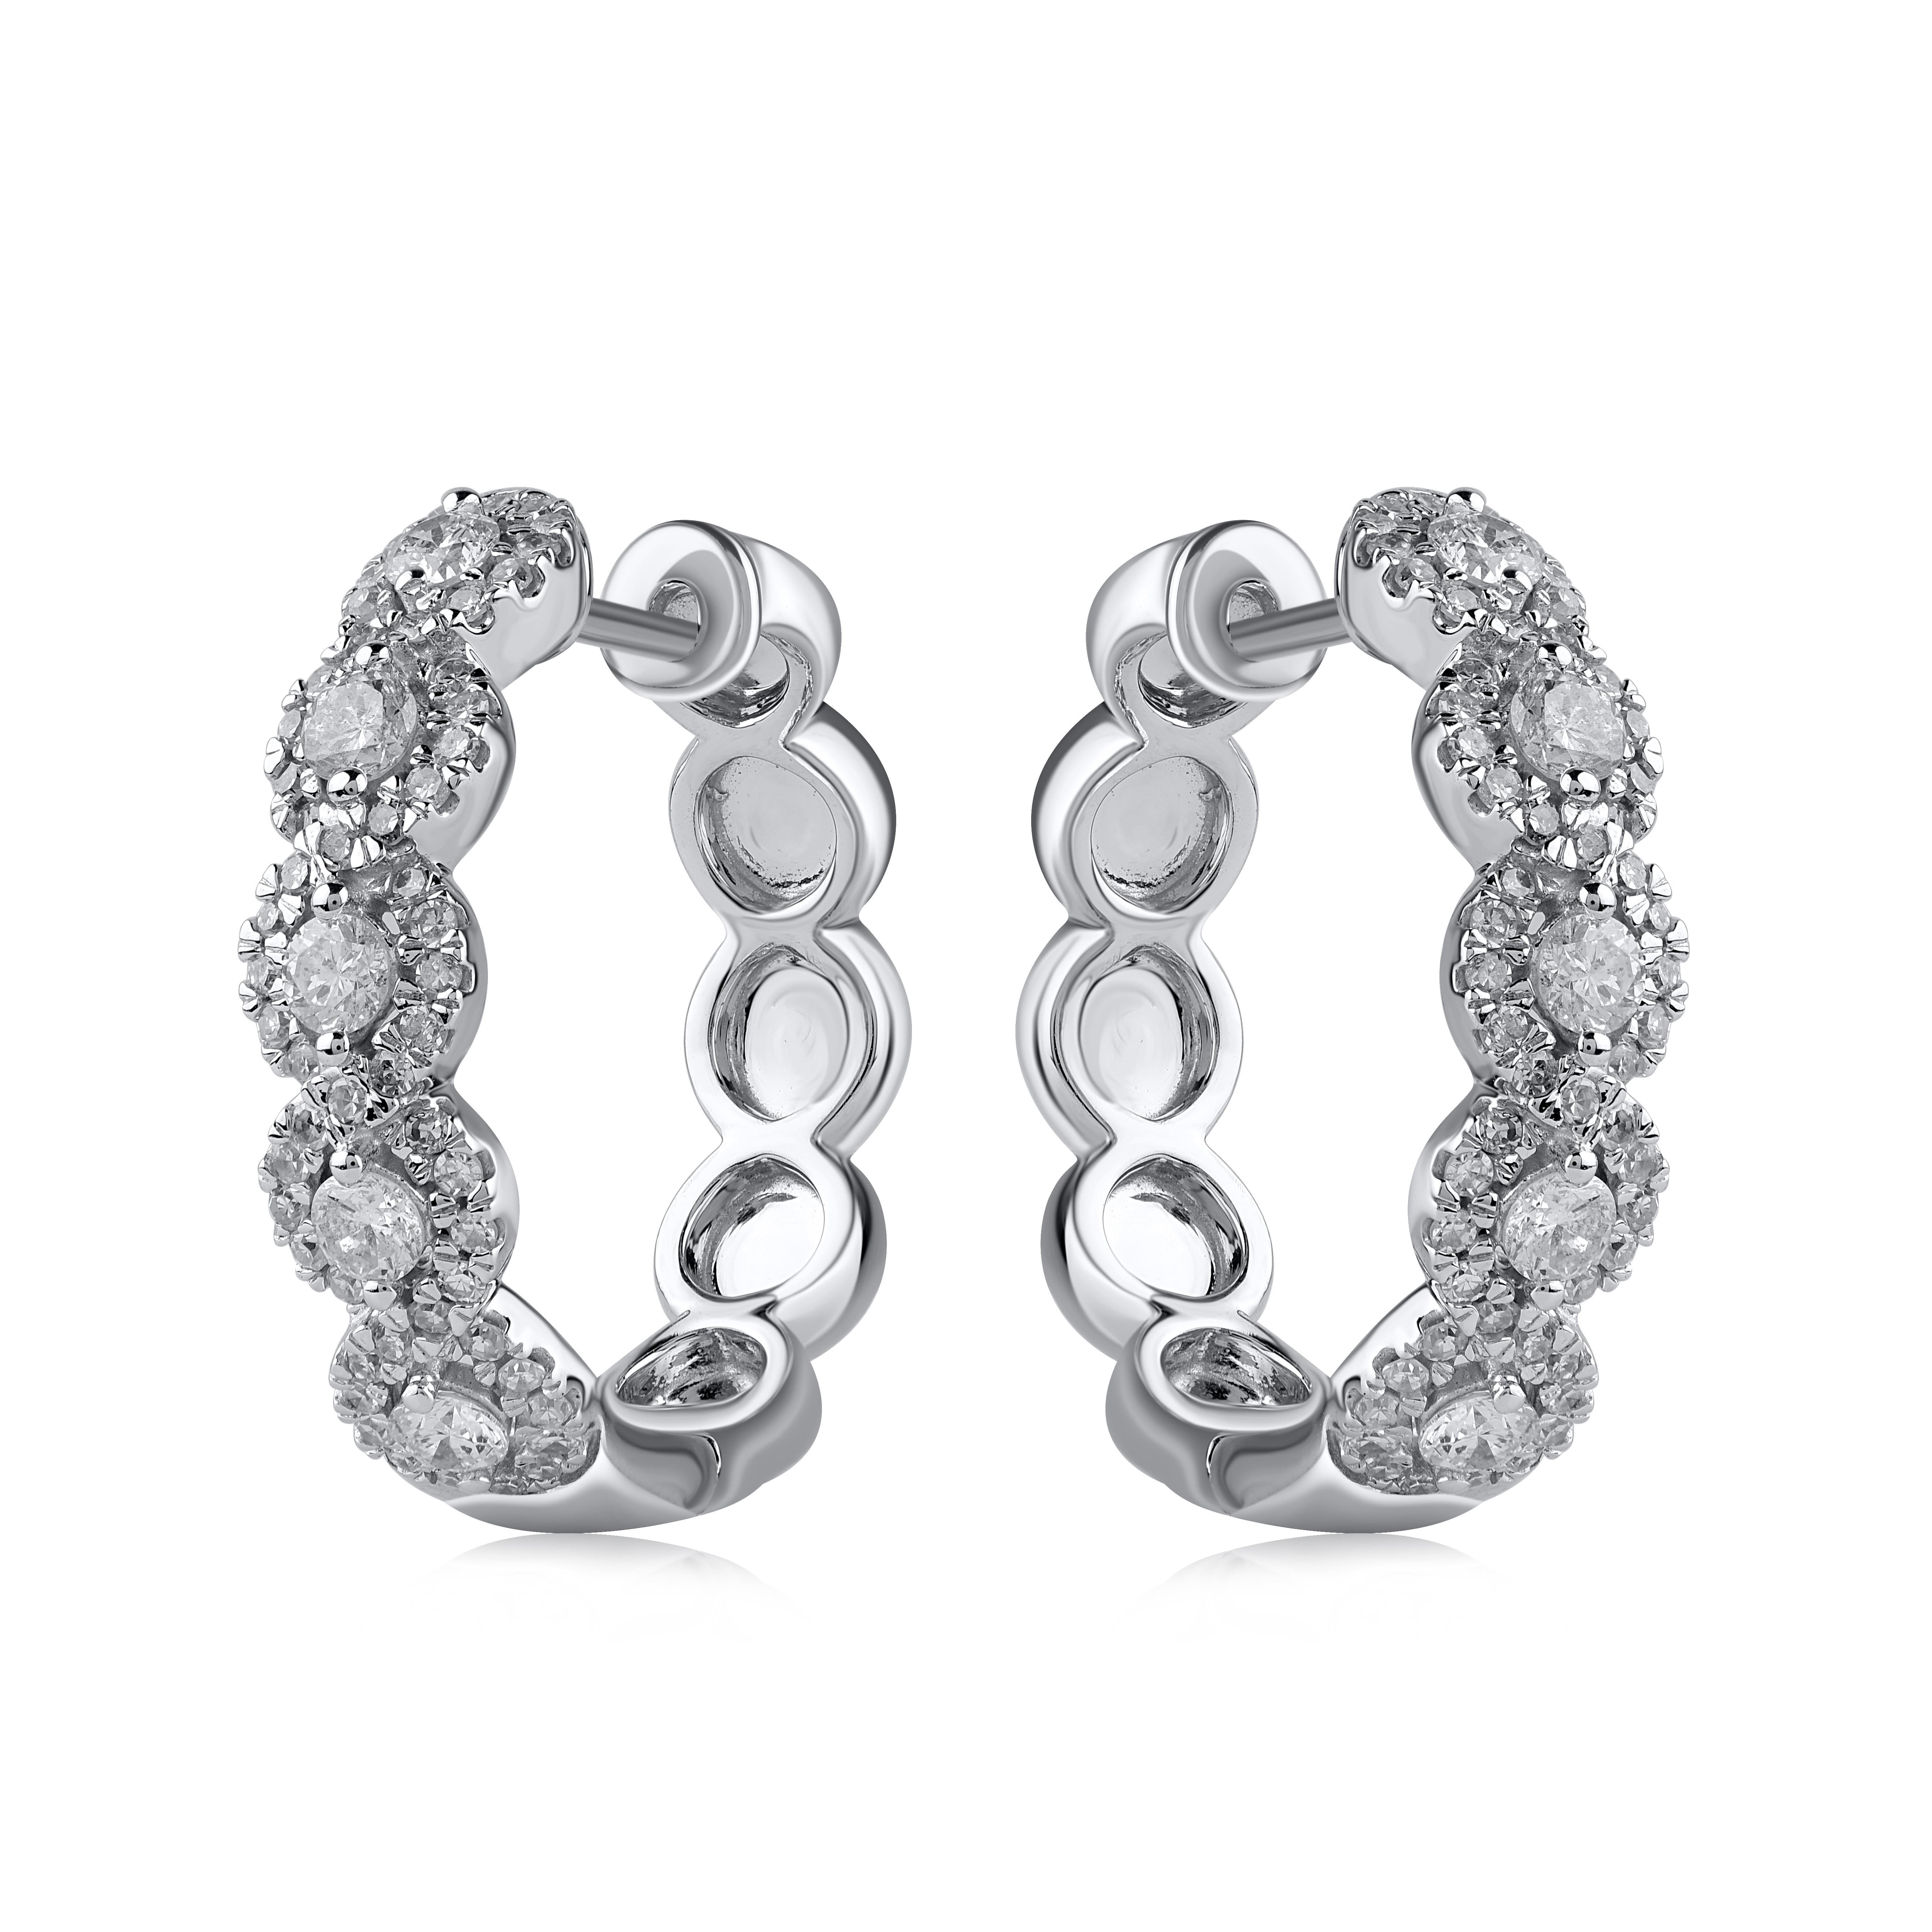 Timeless and elegant, these diamond hoop earring are a style you'll wear with every look in your wardrobe. Crafted in 18Kt white gold with 122 round diamond in prong setting. These earring secure with hinged backs. The white diamonds are graded as